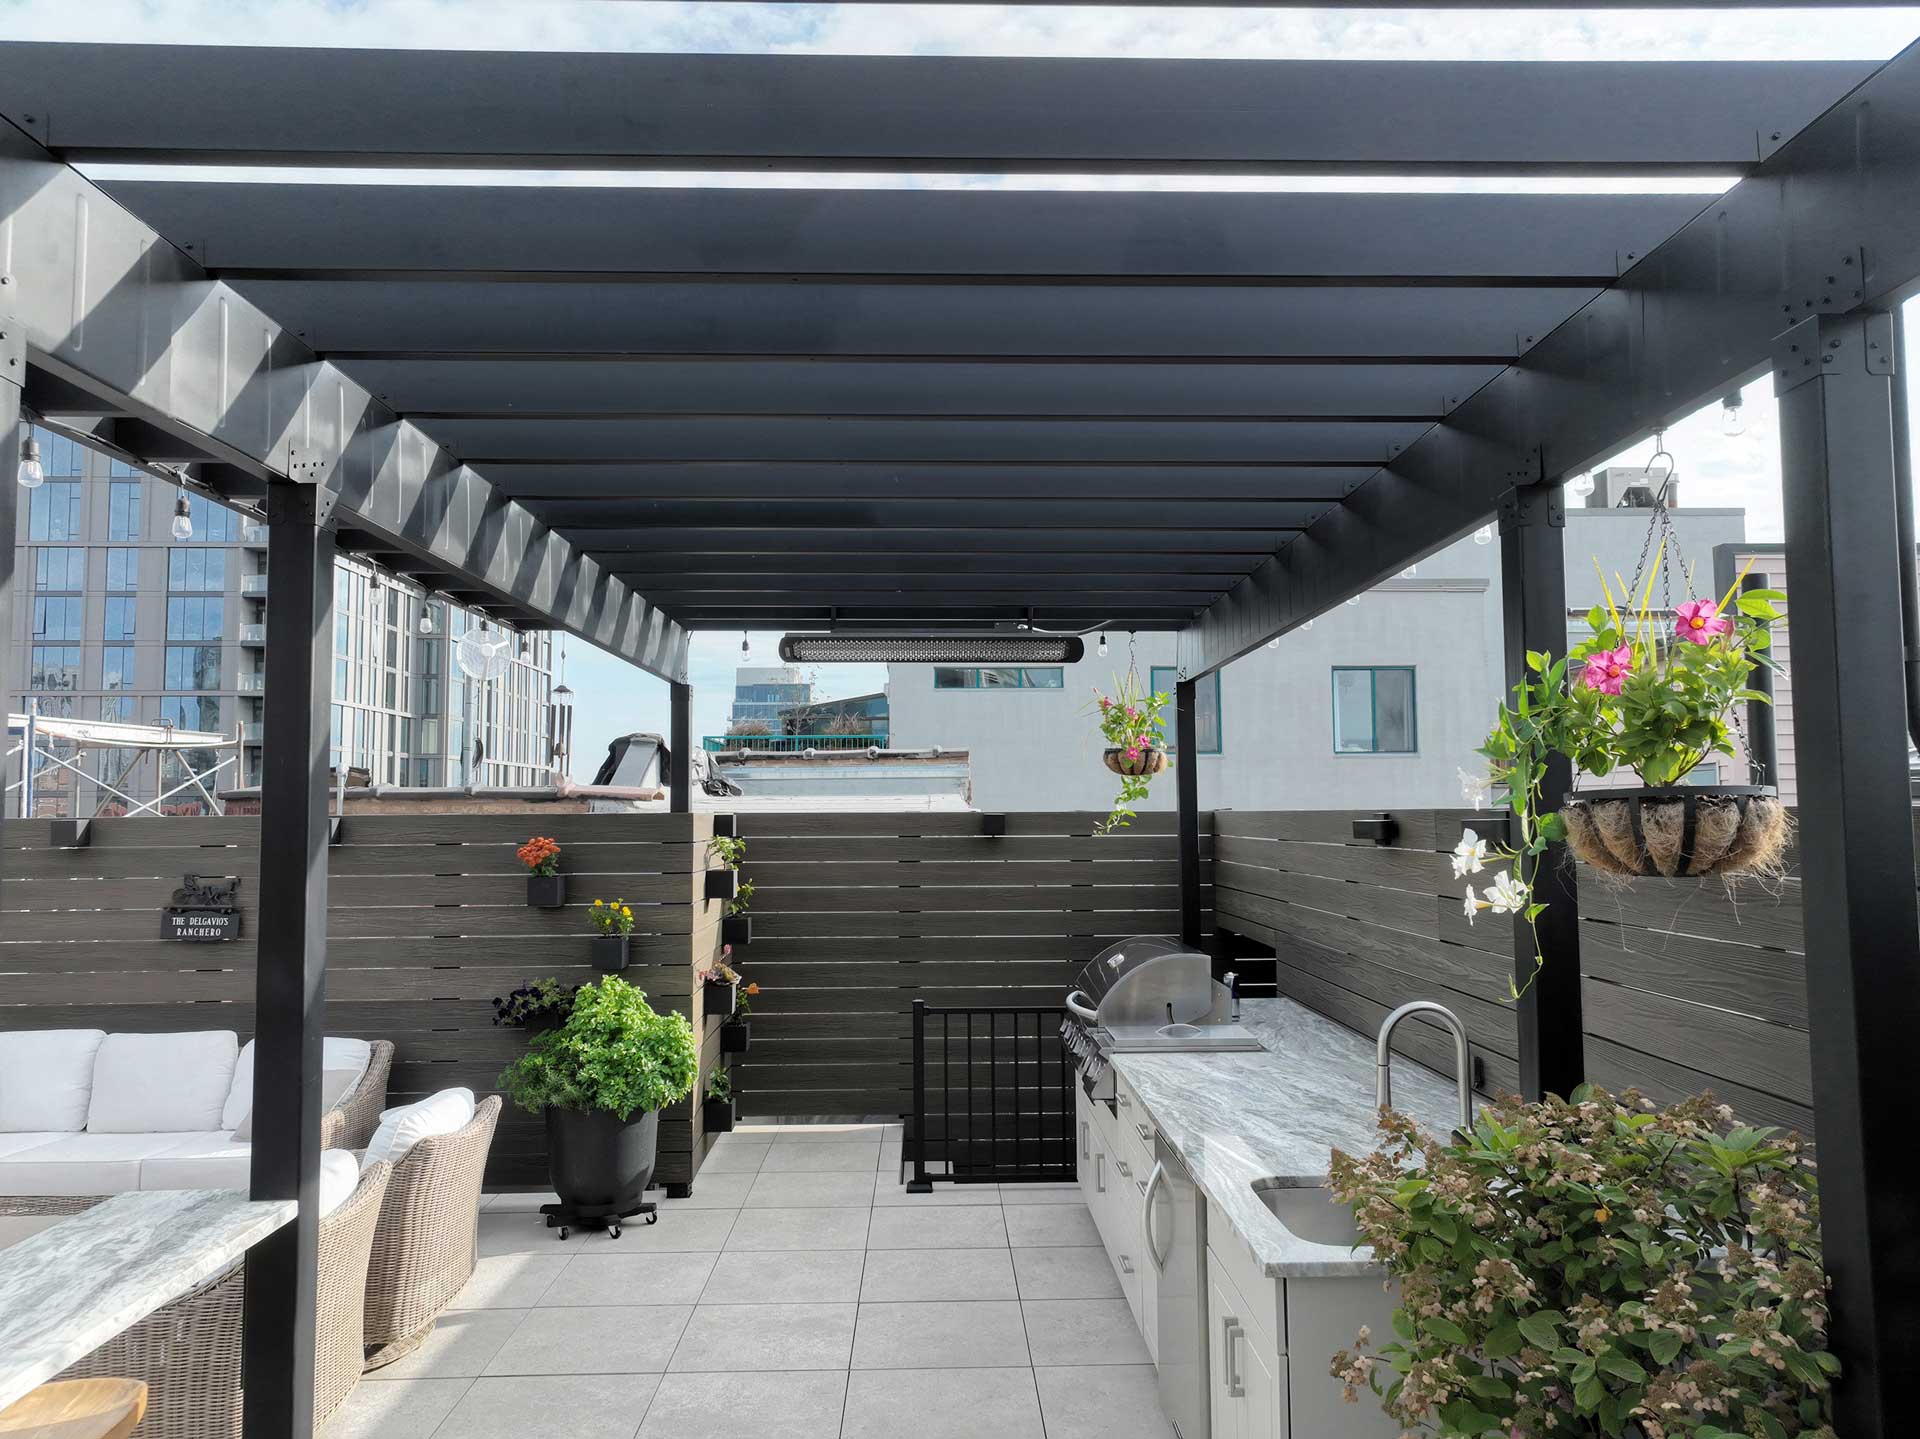 Urban outdoor kitchen under a sleek steel pergola, with integrated lighting and hanging plants